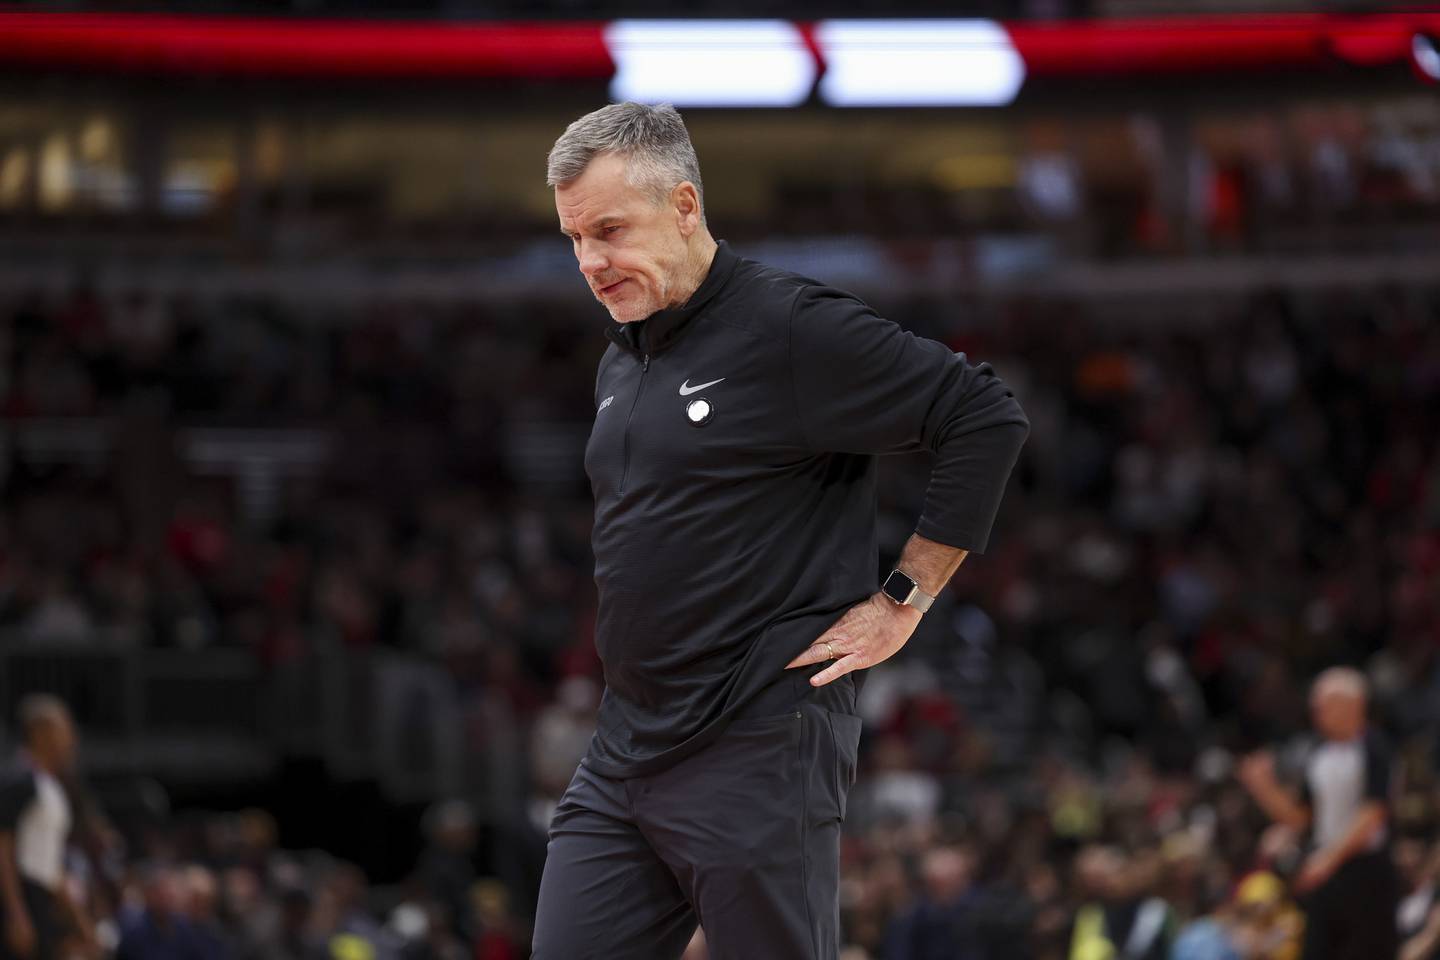 Bulls coach Billy Donovan walks on the court during a timeout in the second quarter against the Raptors on Nov. 7 at the United Center. 